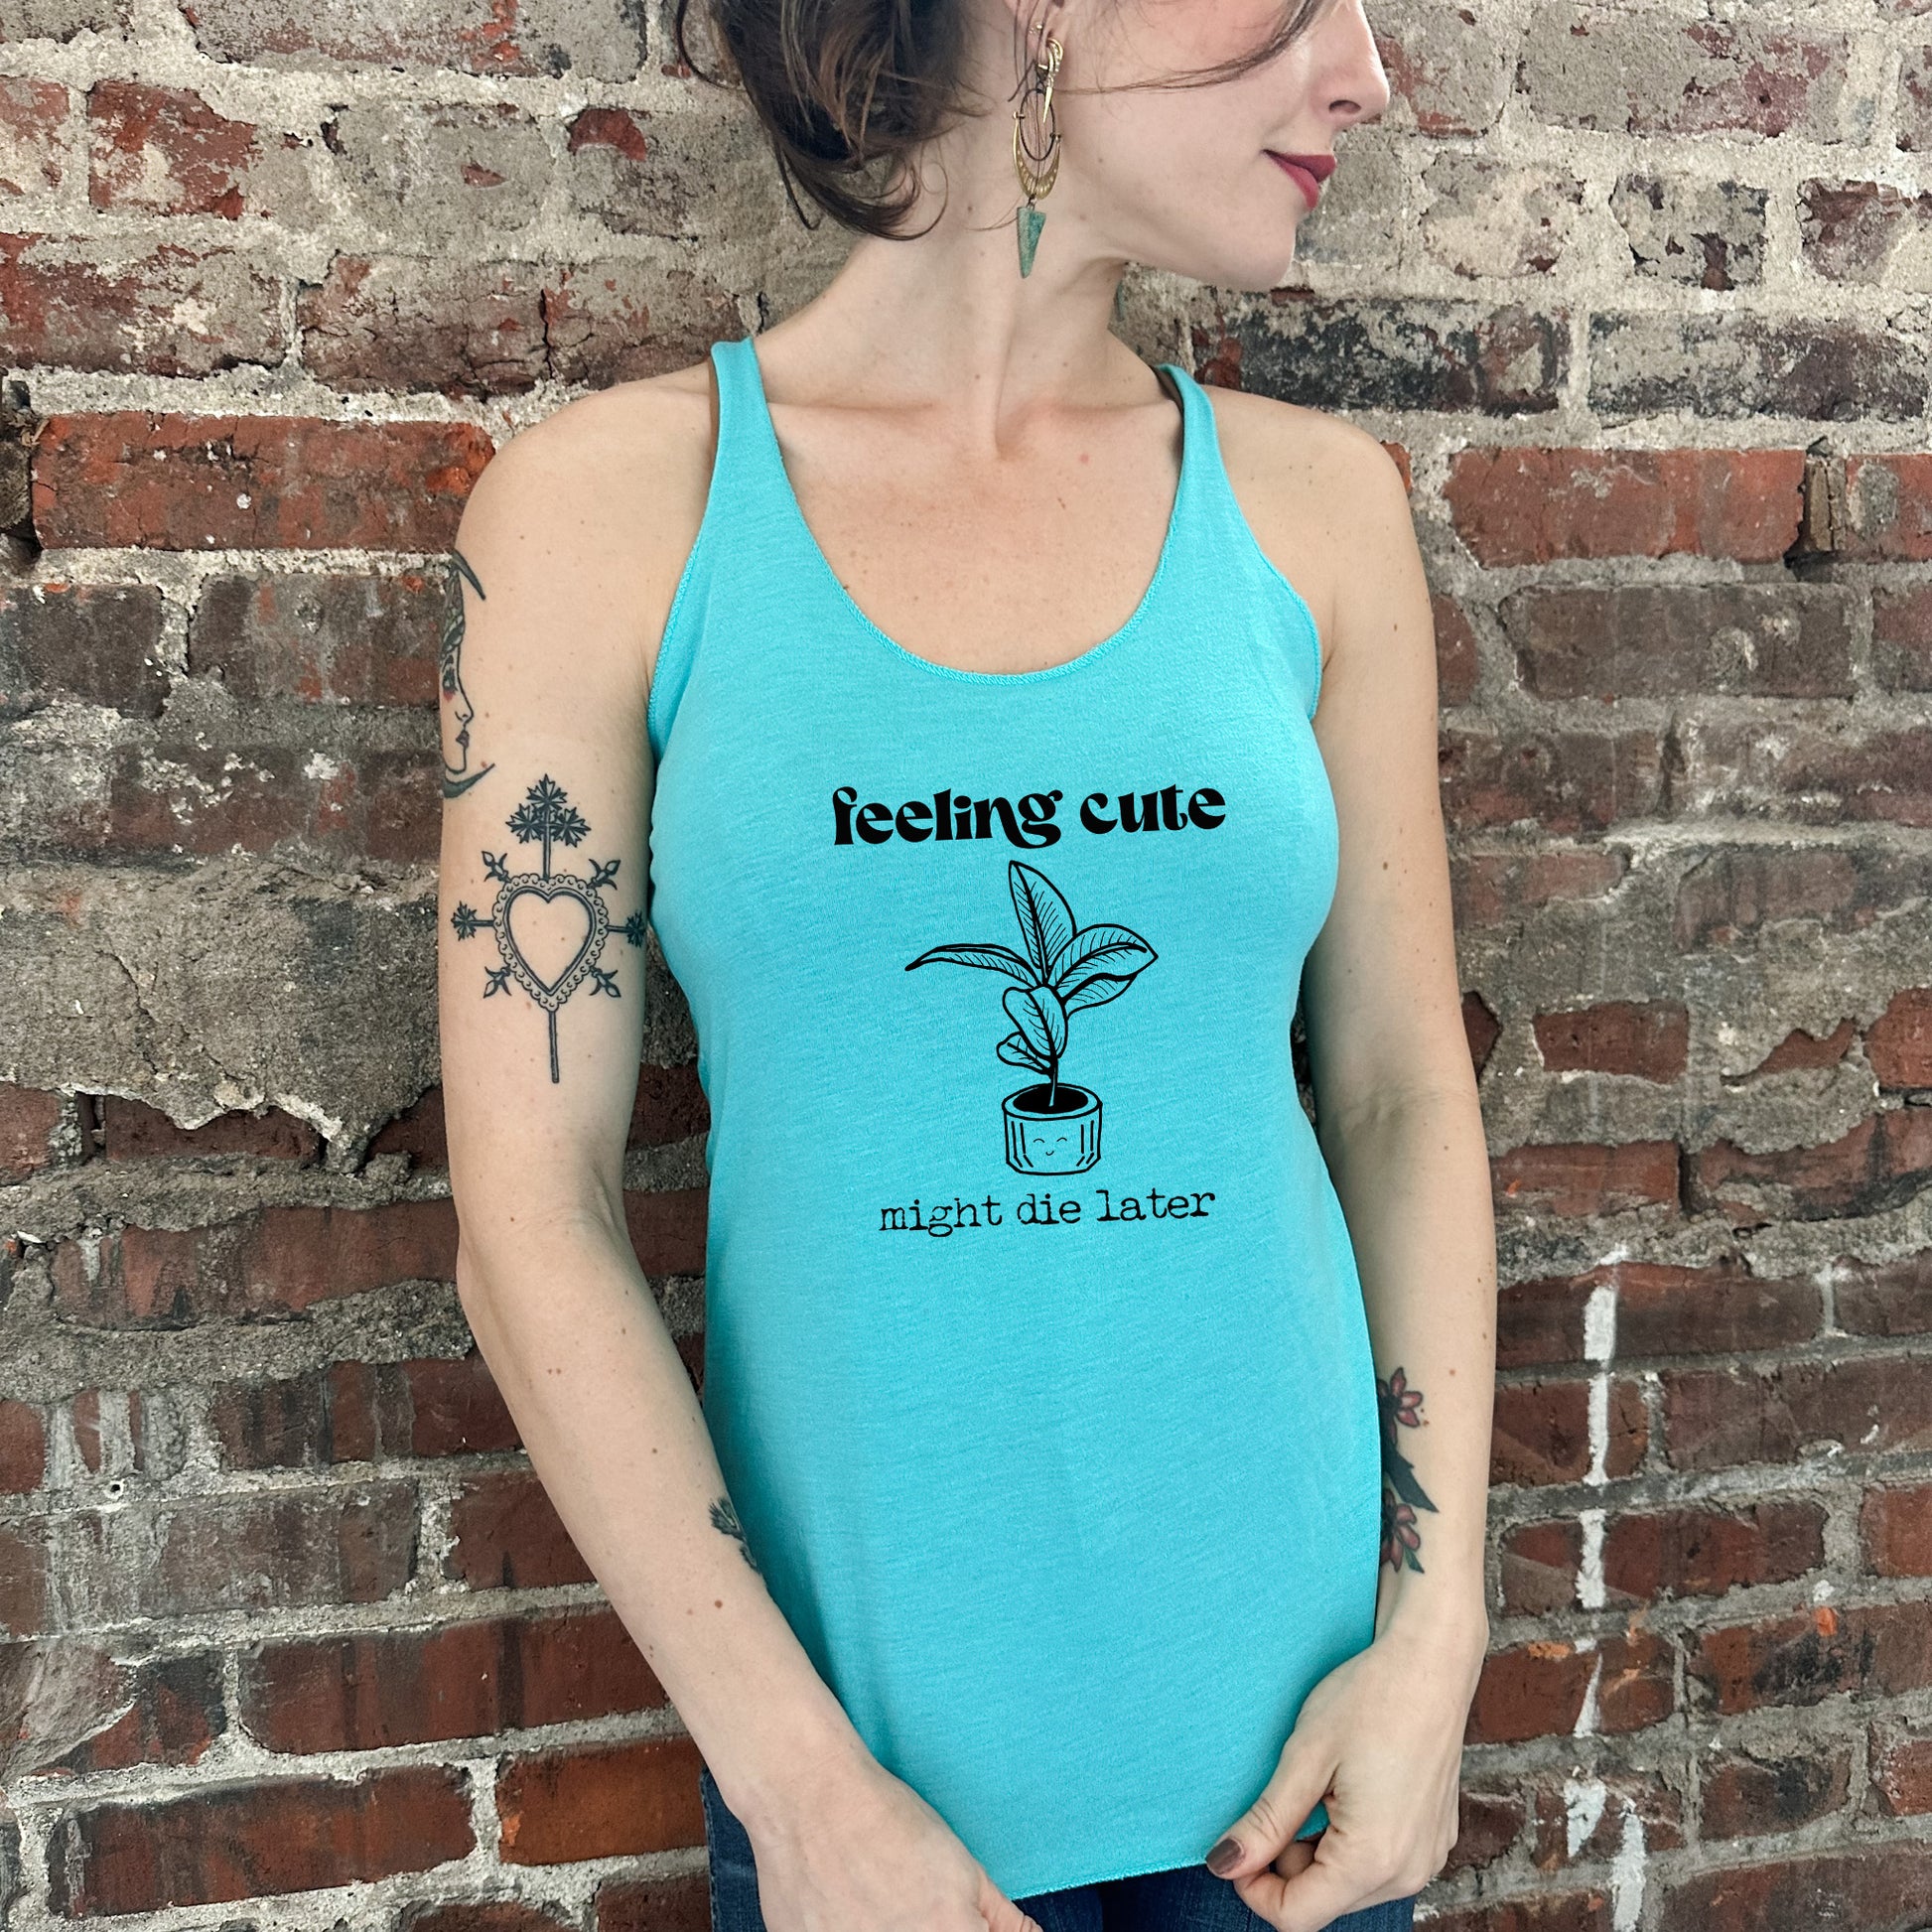 a woman standing against a brick wall wearing a tank top